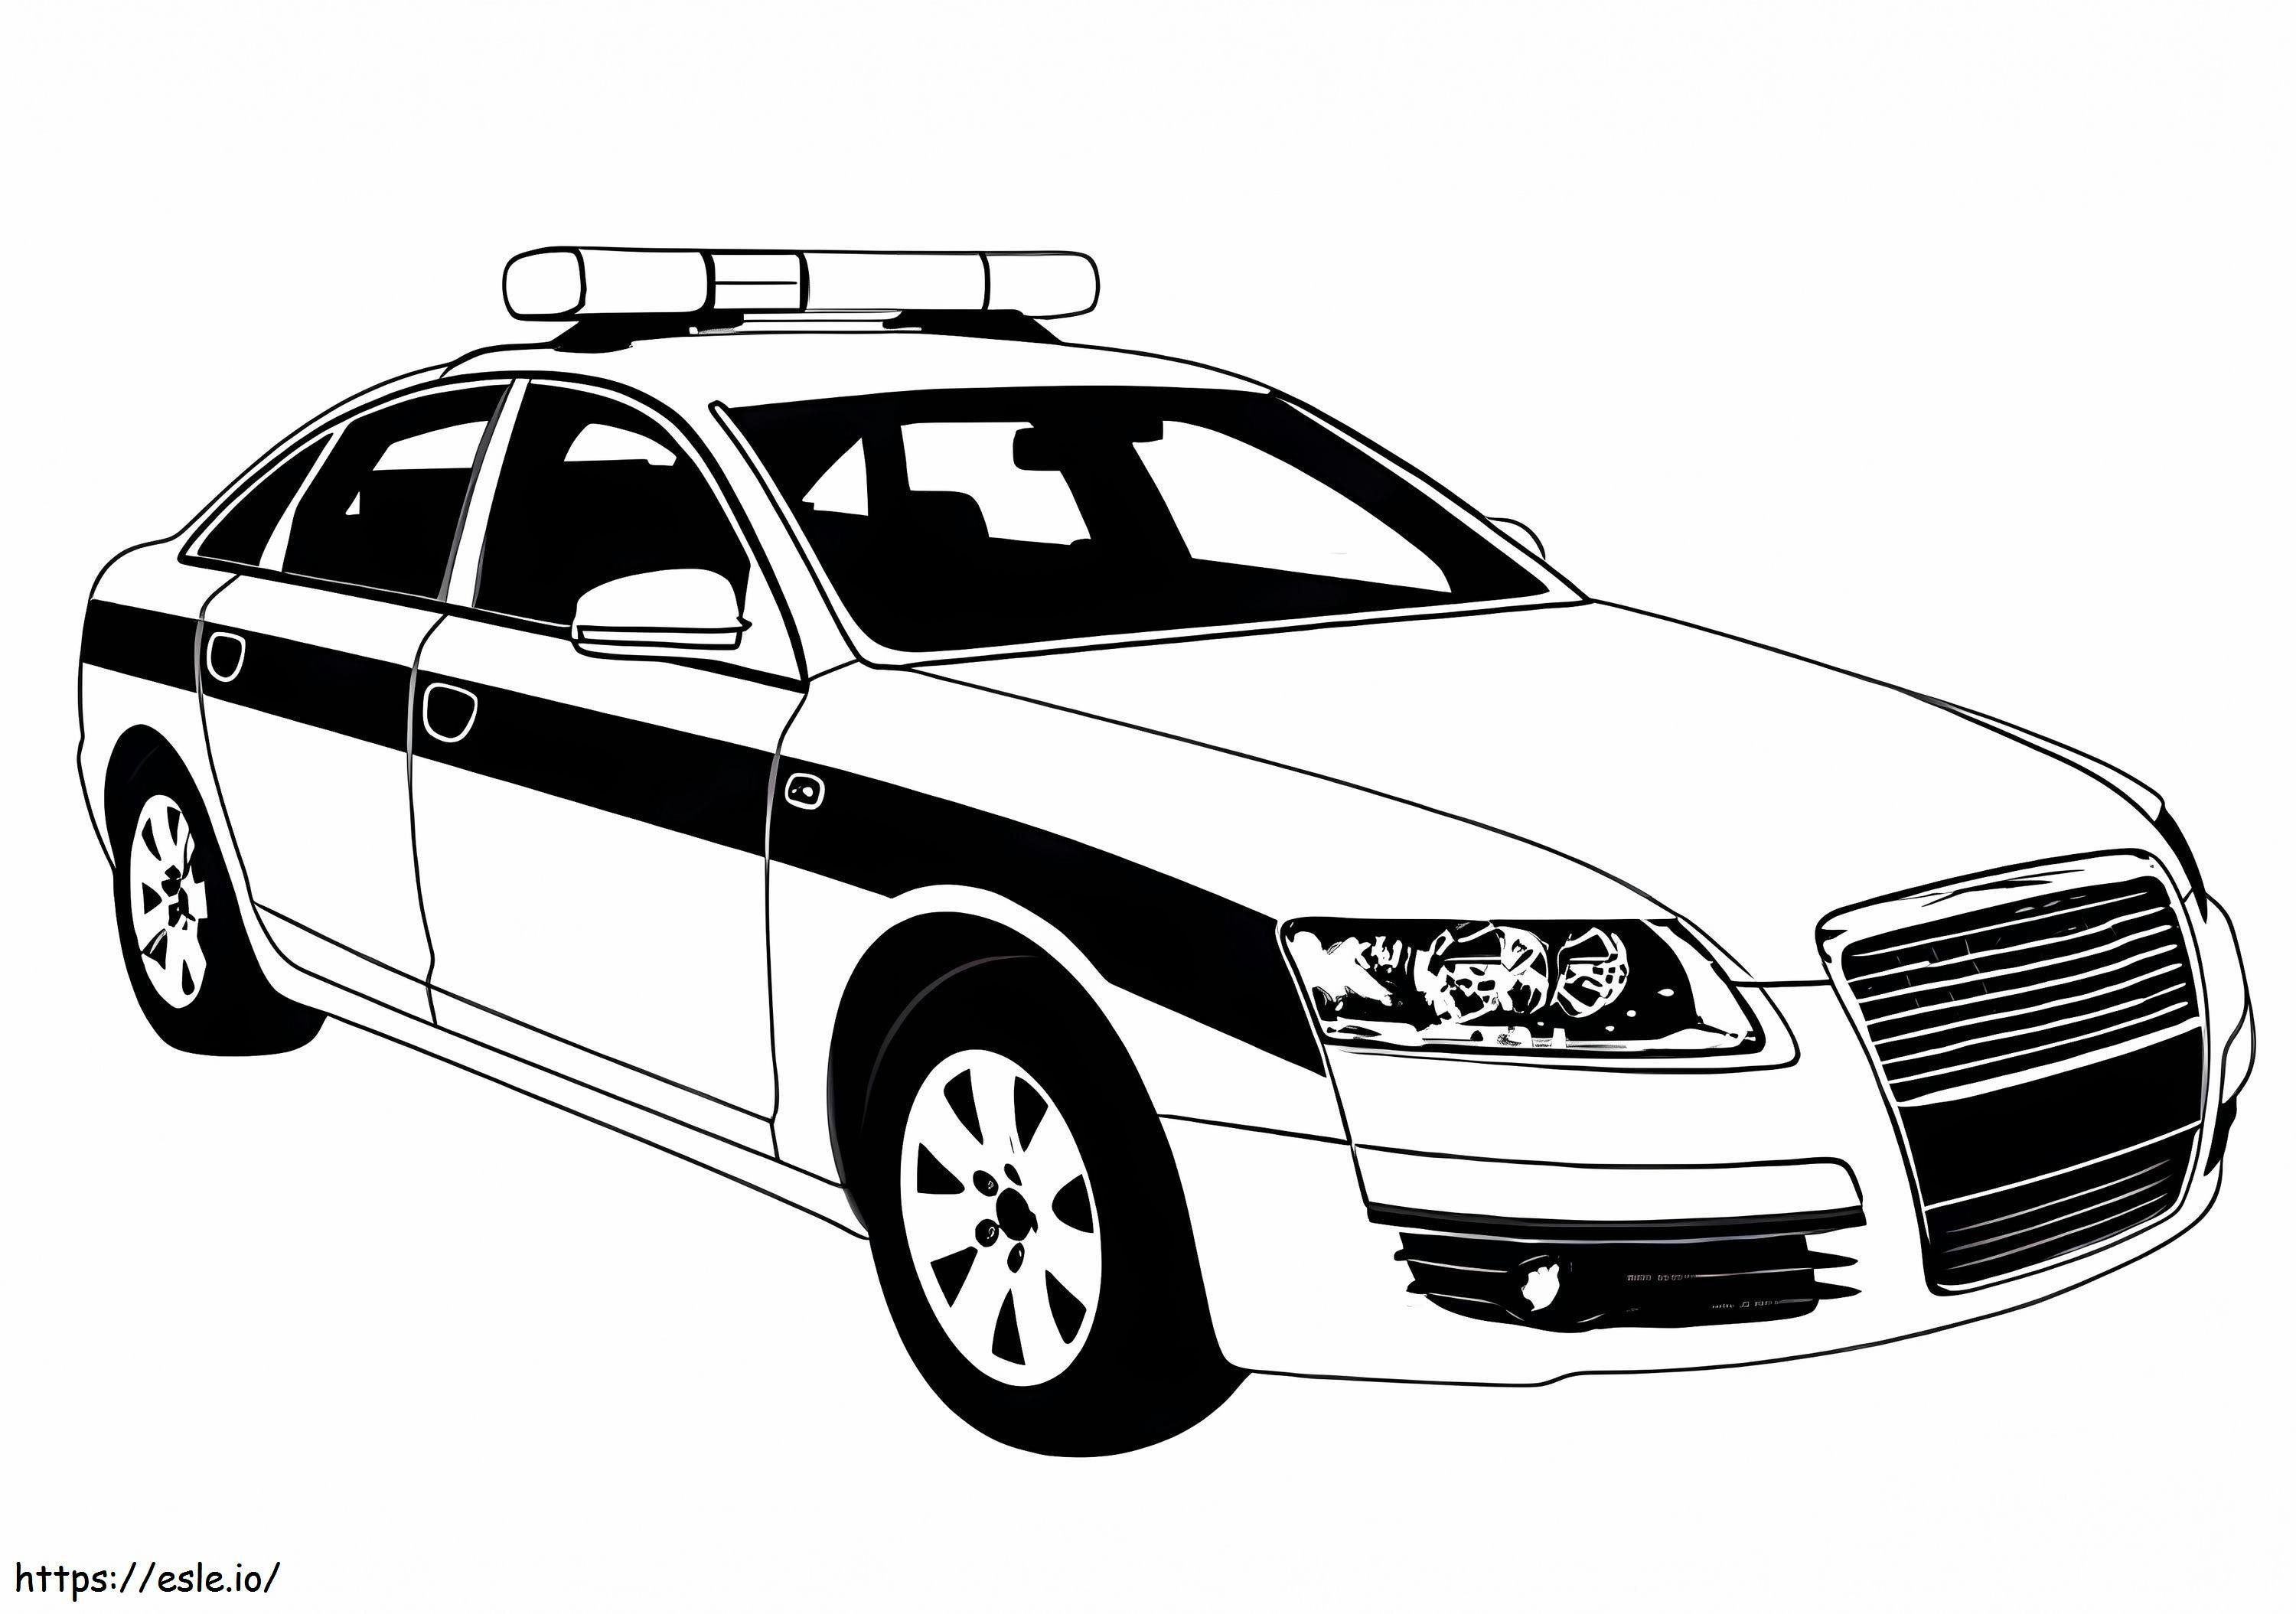 Police Car 14 coloring page